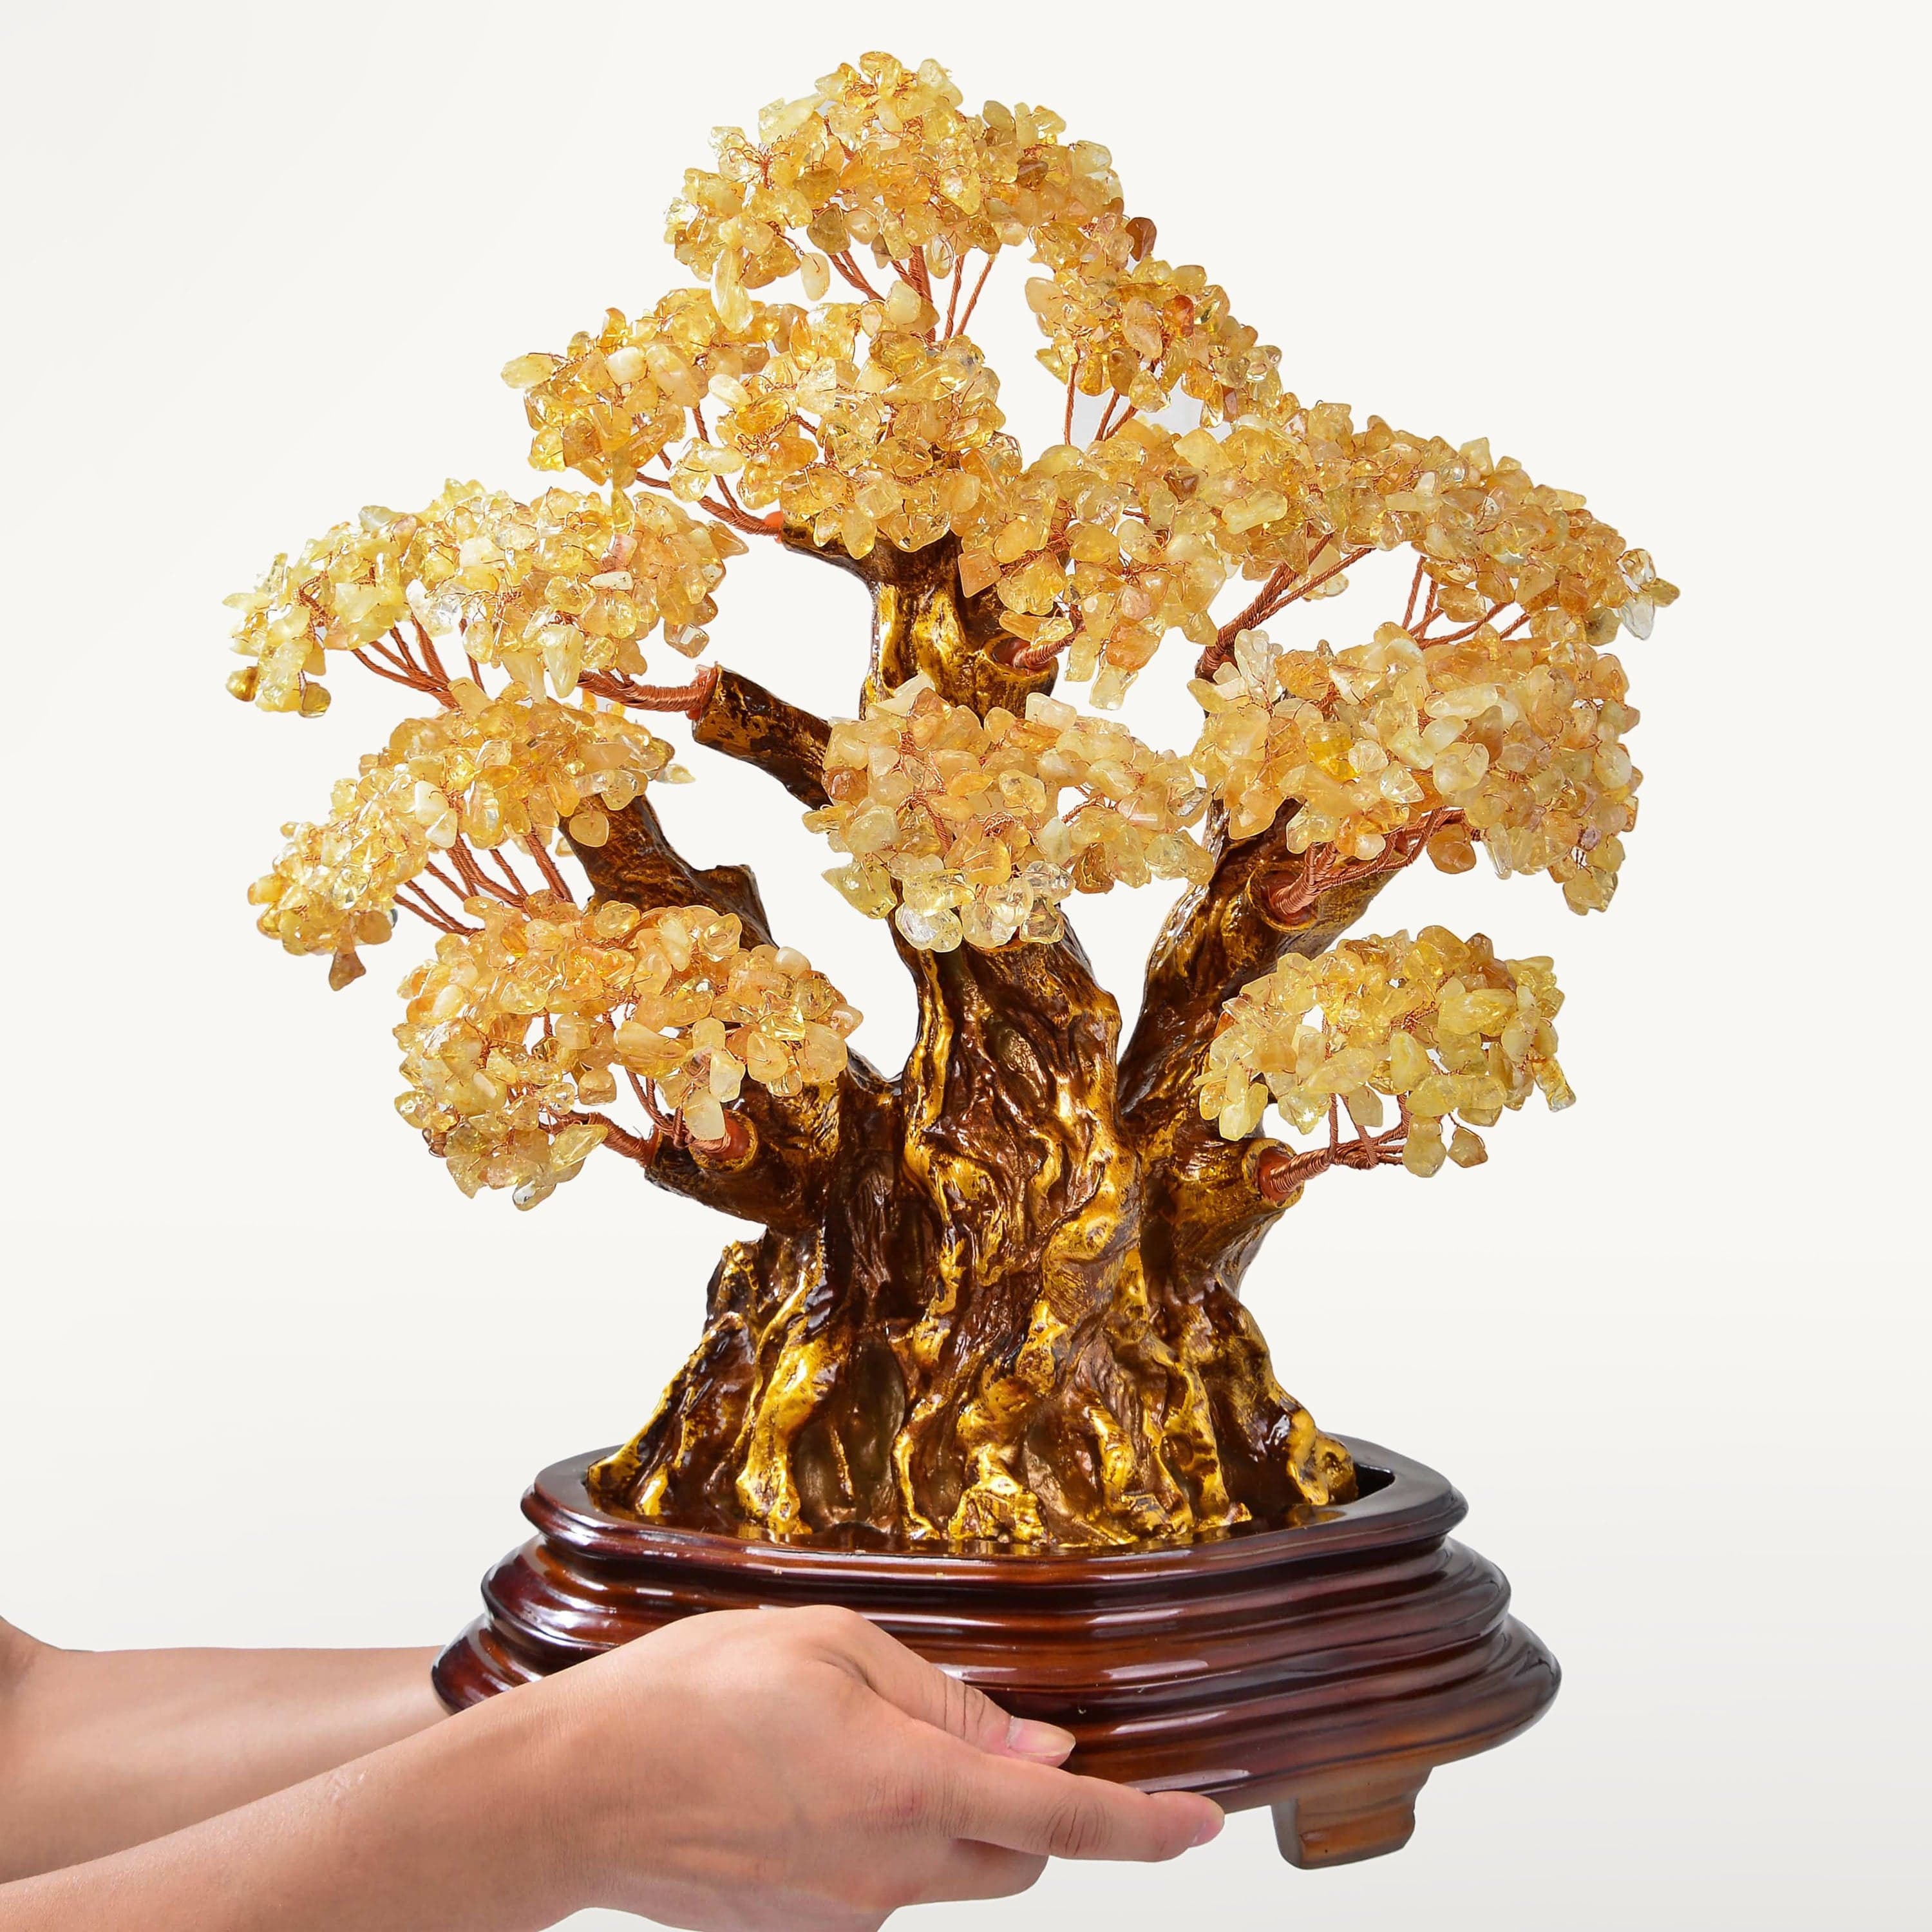 Kalifano Gemstone Trees Citrine Tree of Life Centerpiece with over 2,000 Natural Gemstones K9800-CT